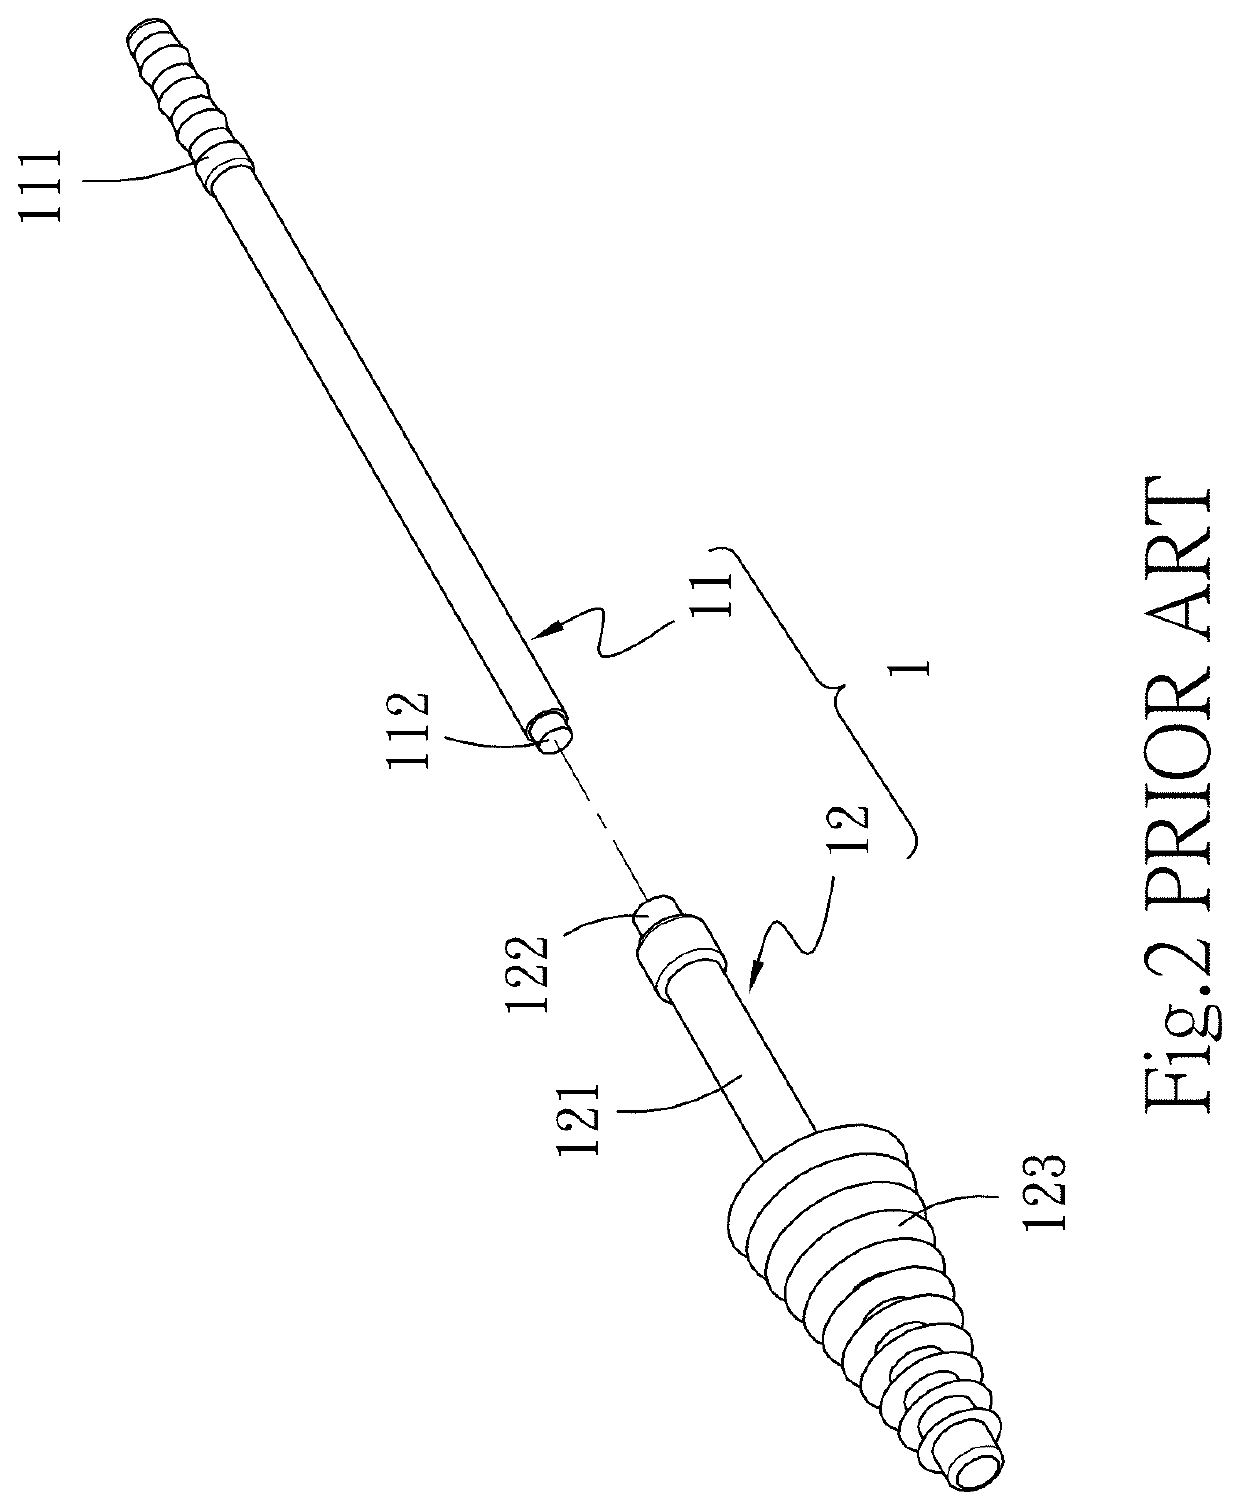 Reciprocating pump-type pipe dredging device